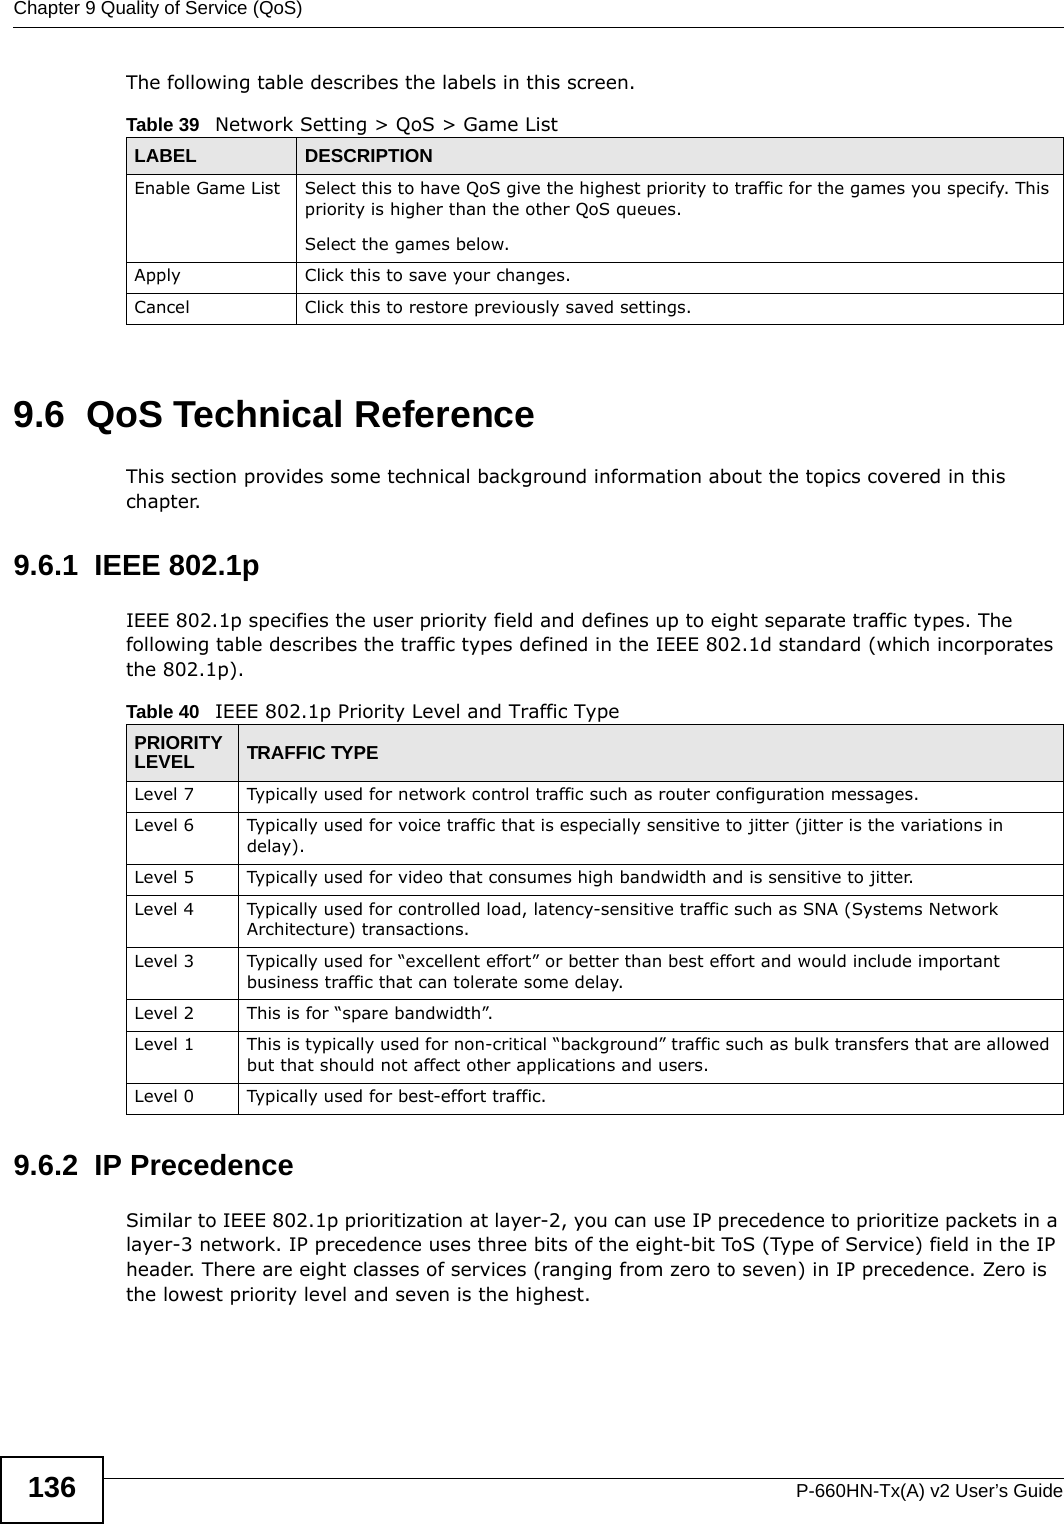 Chapter 9 Quality of Service (QoS)P-660HN-Tx(A) v2 User’s Guide136The following table describes the labels in this screen. 9.6  QoS Technical ReferenceThis section provides some technical background information about the topics covered in this chapter.9.6.1  IEEE 802.1pIEEE 802.1p specifies the user priority field and defines up to eight separate traffic types. The following table describes the traffic types defined in the IEEE 802.1d standard (which incorporates the 802.1p). 9.6.2  IP PrecedenceSimilar to IEEE 802.1p prioritization at layer-2, you can use IP precedence to prioritize packets in a layer-3 network. IP precedence uses three bits of the eight-bit ToS (Type of Service) field in the IP header. There are eight classes of services (ranging from zero to seven) in IP precedence. Zero is the lowest priority level and seven is the highest.Table 39   Network Setting &gt; QoS &gt; Game ListLABEL DESCRIPTIONEnable Game List Select this to have QoS give the highest priority to traffic for the games you specify. This priority is higher than the other QoS queues.Select the games below.Apply Click this to save your changes.Cancel Click this to restore previously saved settings.Table 40   IEEE 802.1p Priority Level and Traffic TypePRIORITY LEVEL TRAFFIC TYPELevel 7 Typically used for network control traffic such as router configuration messages.Level 6 Typically used for voice traffic that is especially sensitive to jitter (jitter is the variations in delay).Level 5 Typically used for video that consumes high bandwidth and is sensitive to jitter.Level 4 Typically used for controlled load, latency-sensitive traffic such as SNA (Systems Network Architecture) transactions.Level 3 Typically used for “excellent effort” or better than best effort and would include important business traffic that can tolerate some delay.Level 2 This is for “spare bandwidth”. Level 1 This is typically used for non-critical “background” traffic such as bulk transfers that are allowed but that should not affect other applications and users. Level 0 Typically used for best-effort traffic.